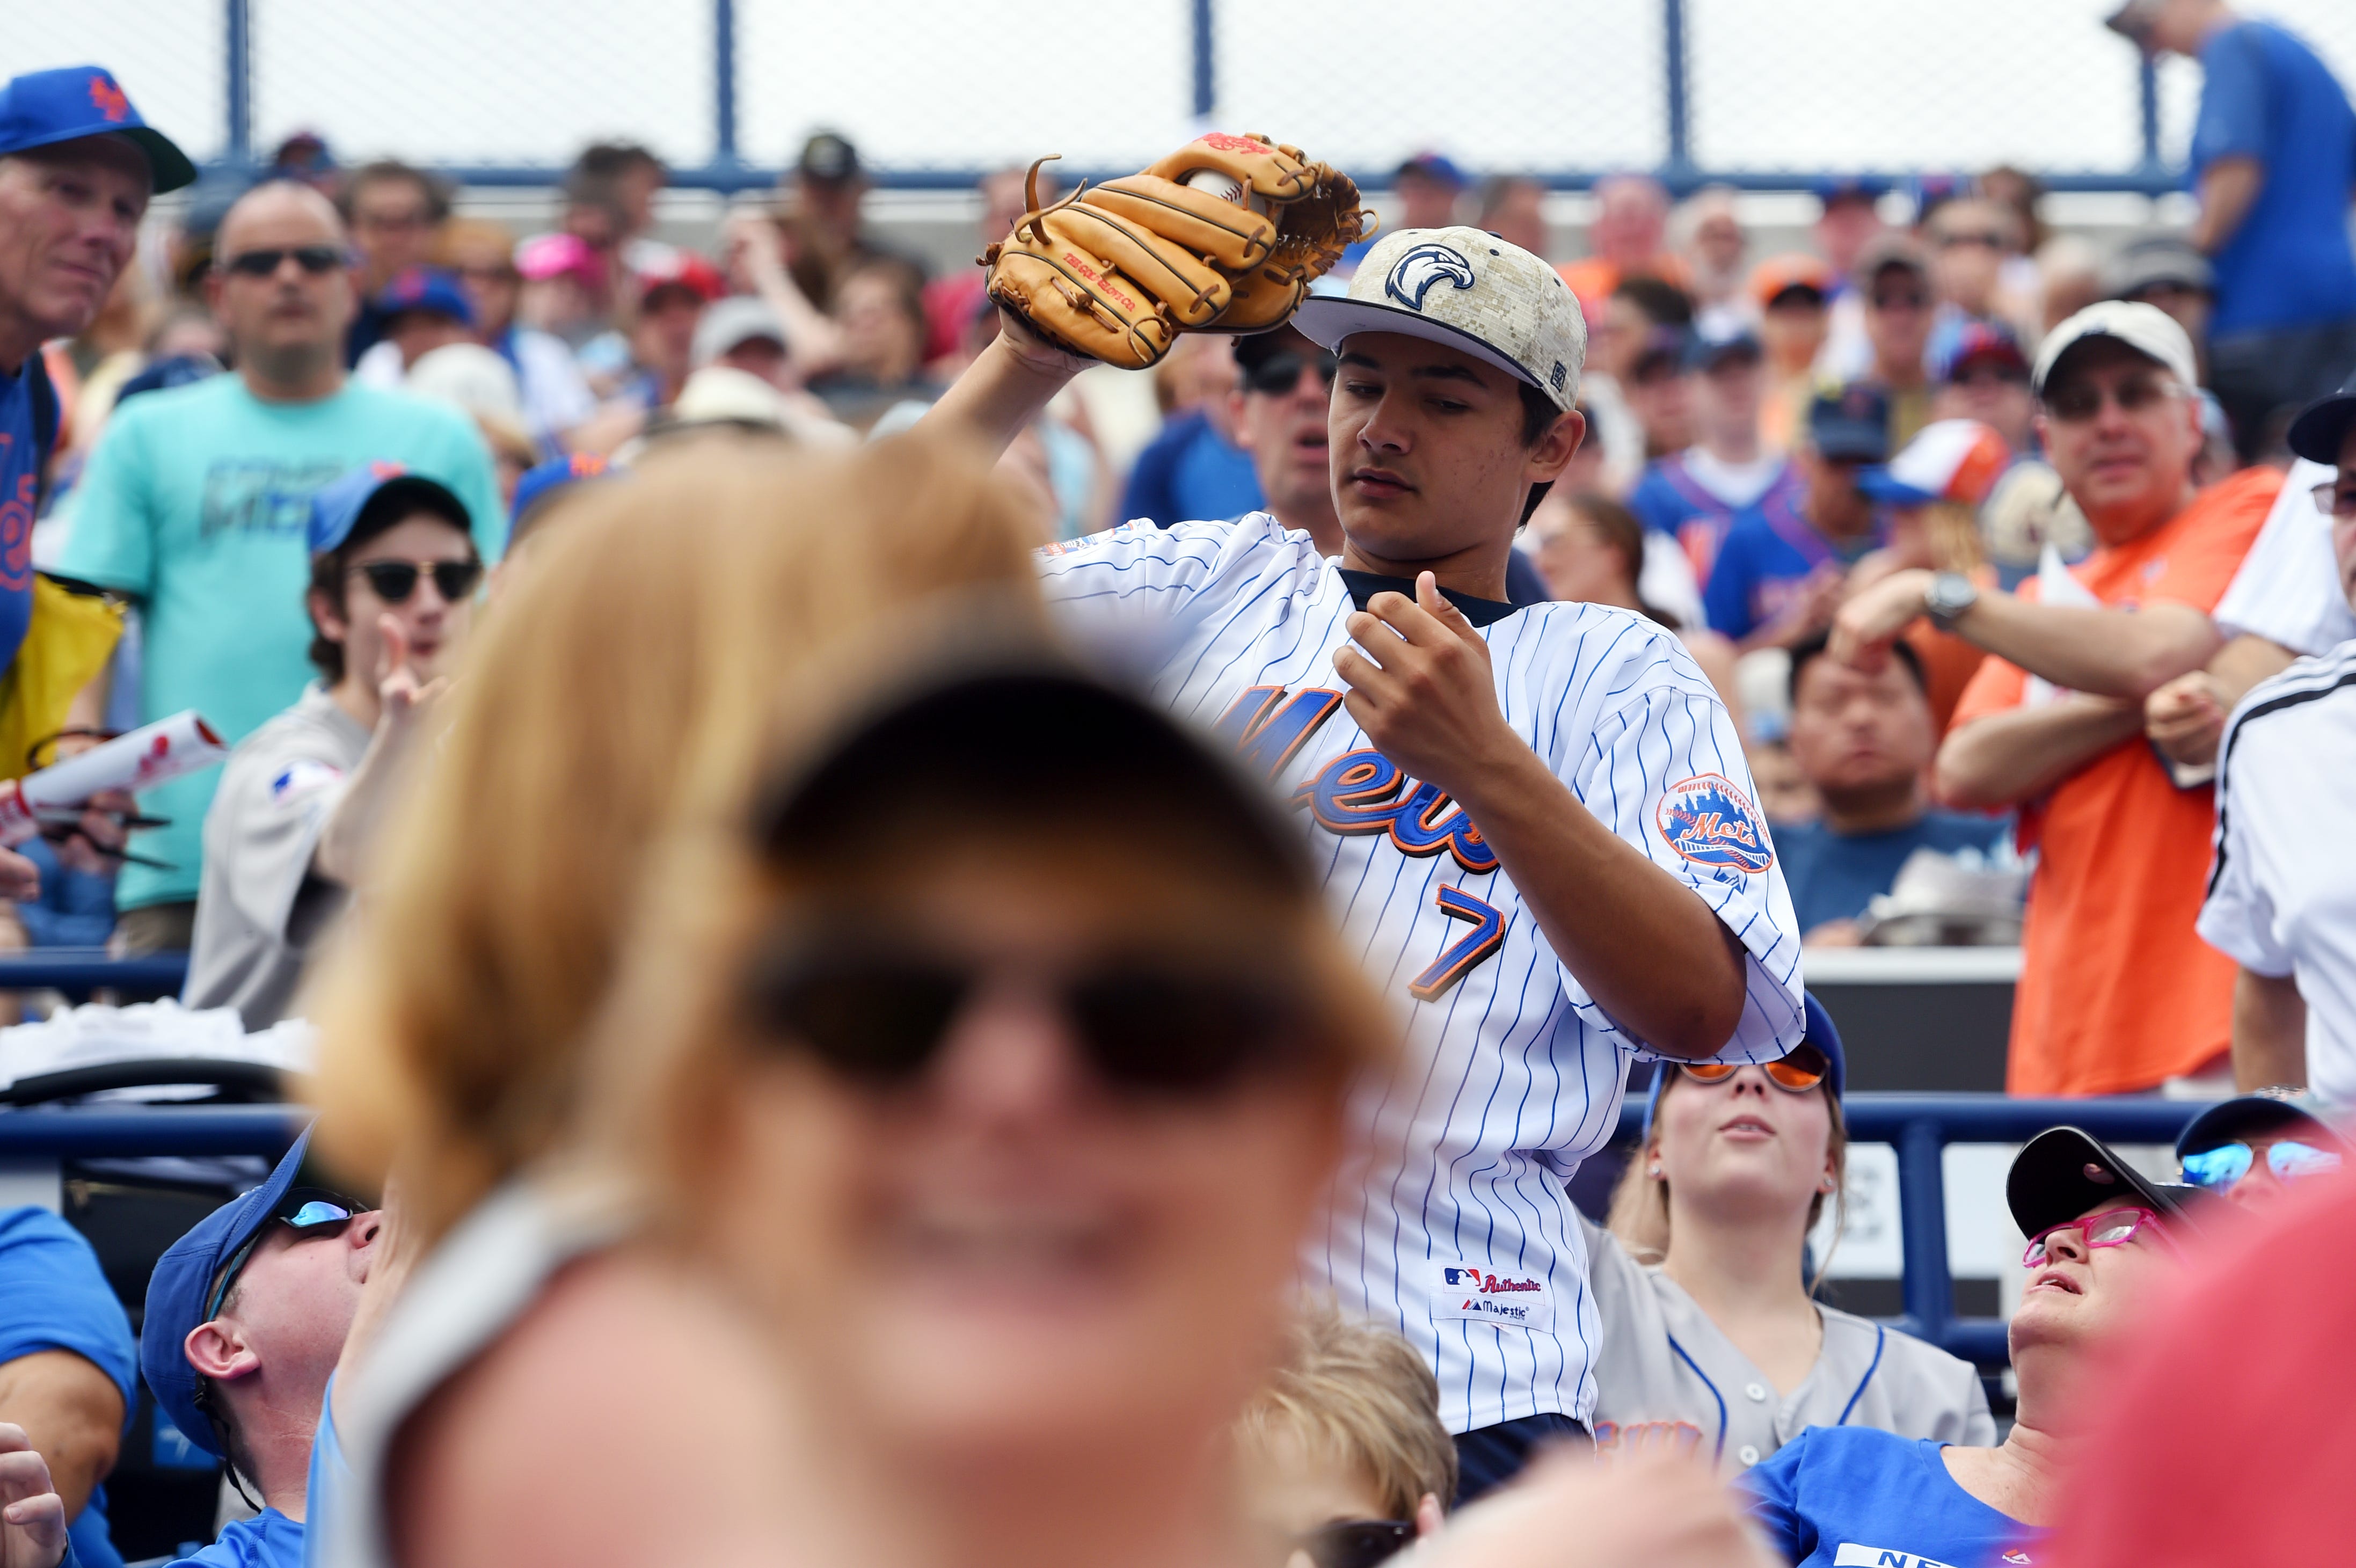 New York Mets spring training tickets go on sale at First Data Field